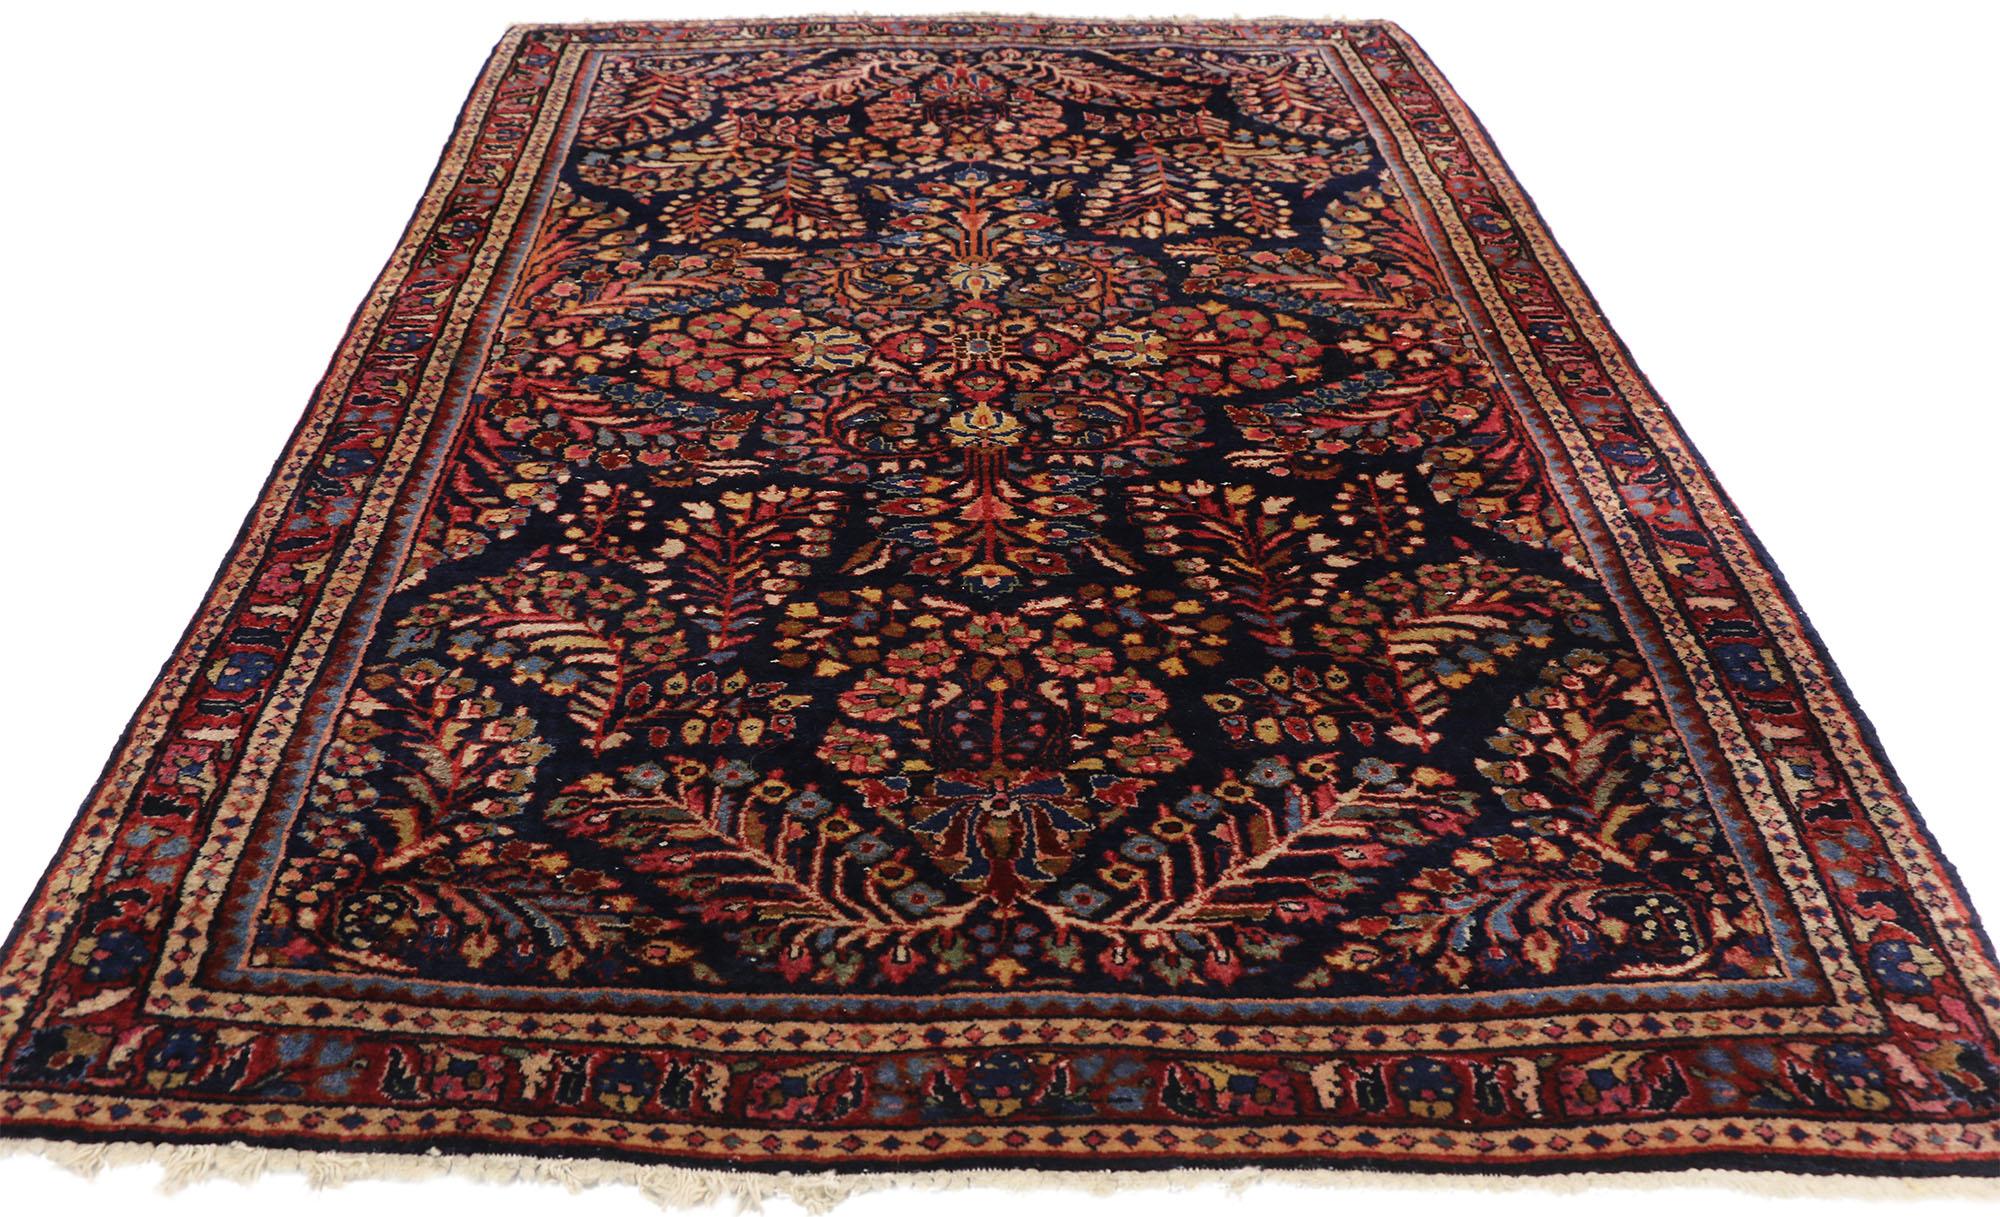 Sarouk Farahan Antique Persian Sarouk Rug with Luxe Victorian Style, Scatter Rug